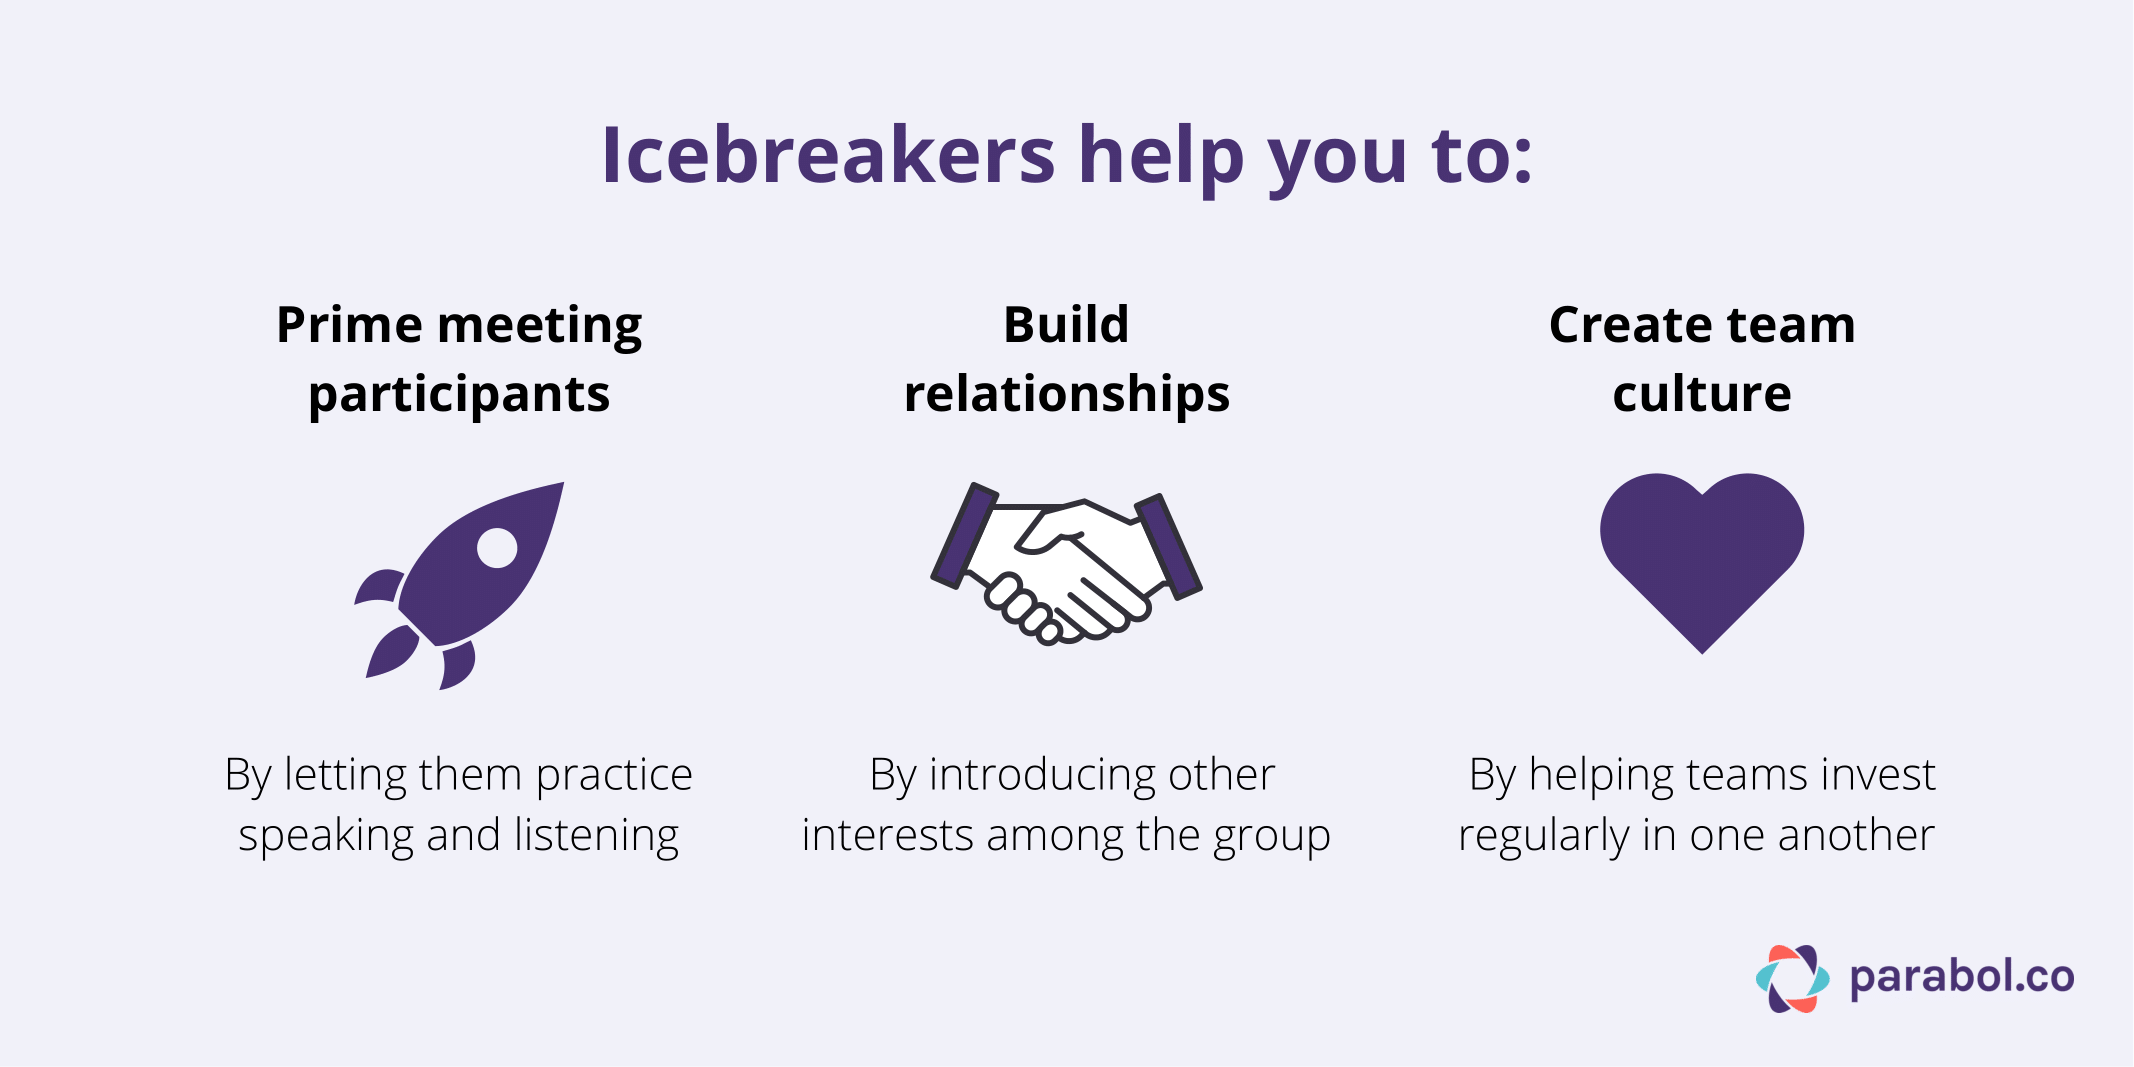 Benefits of icebreakers: priming participants, building relationships and creating culture
